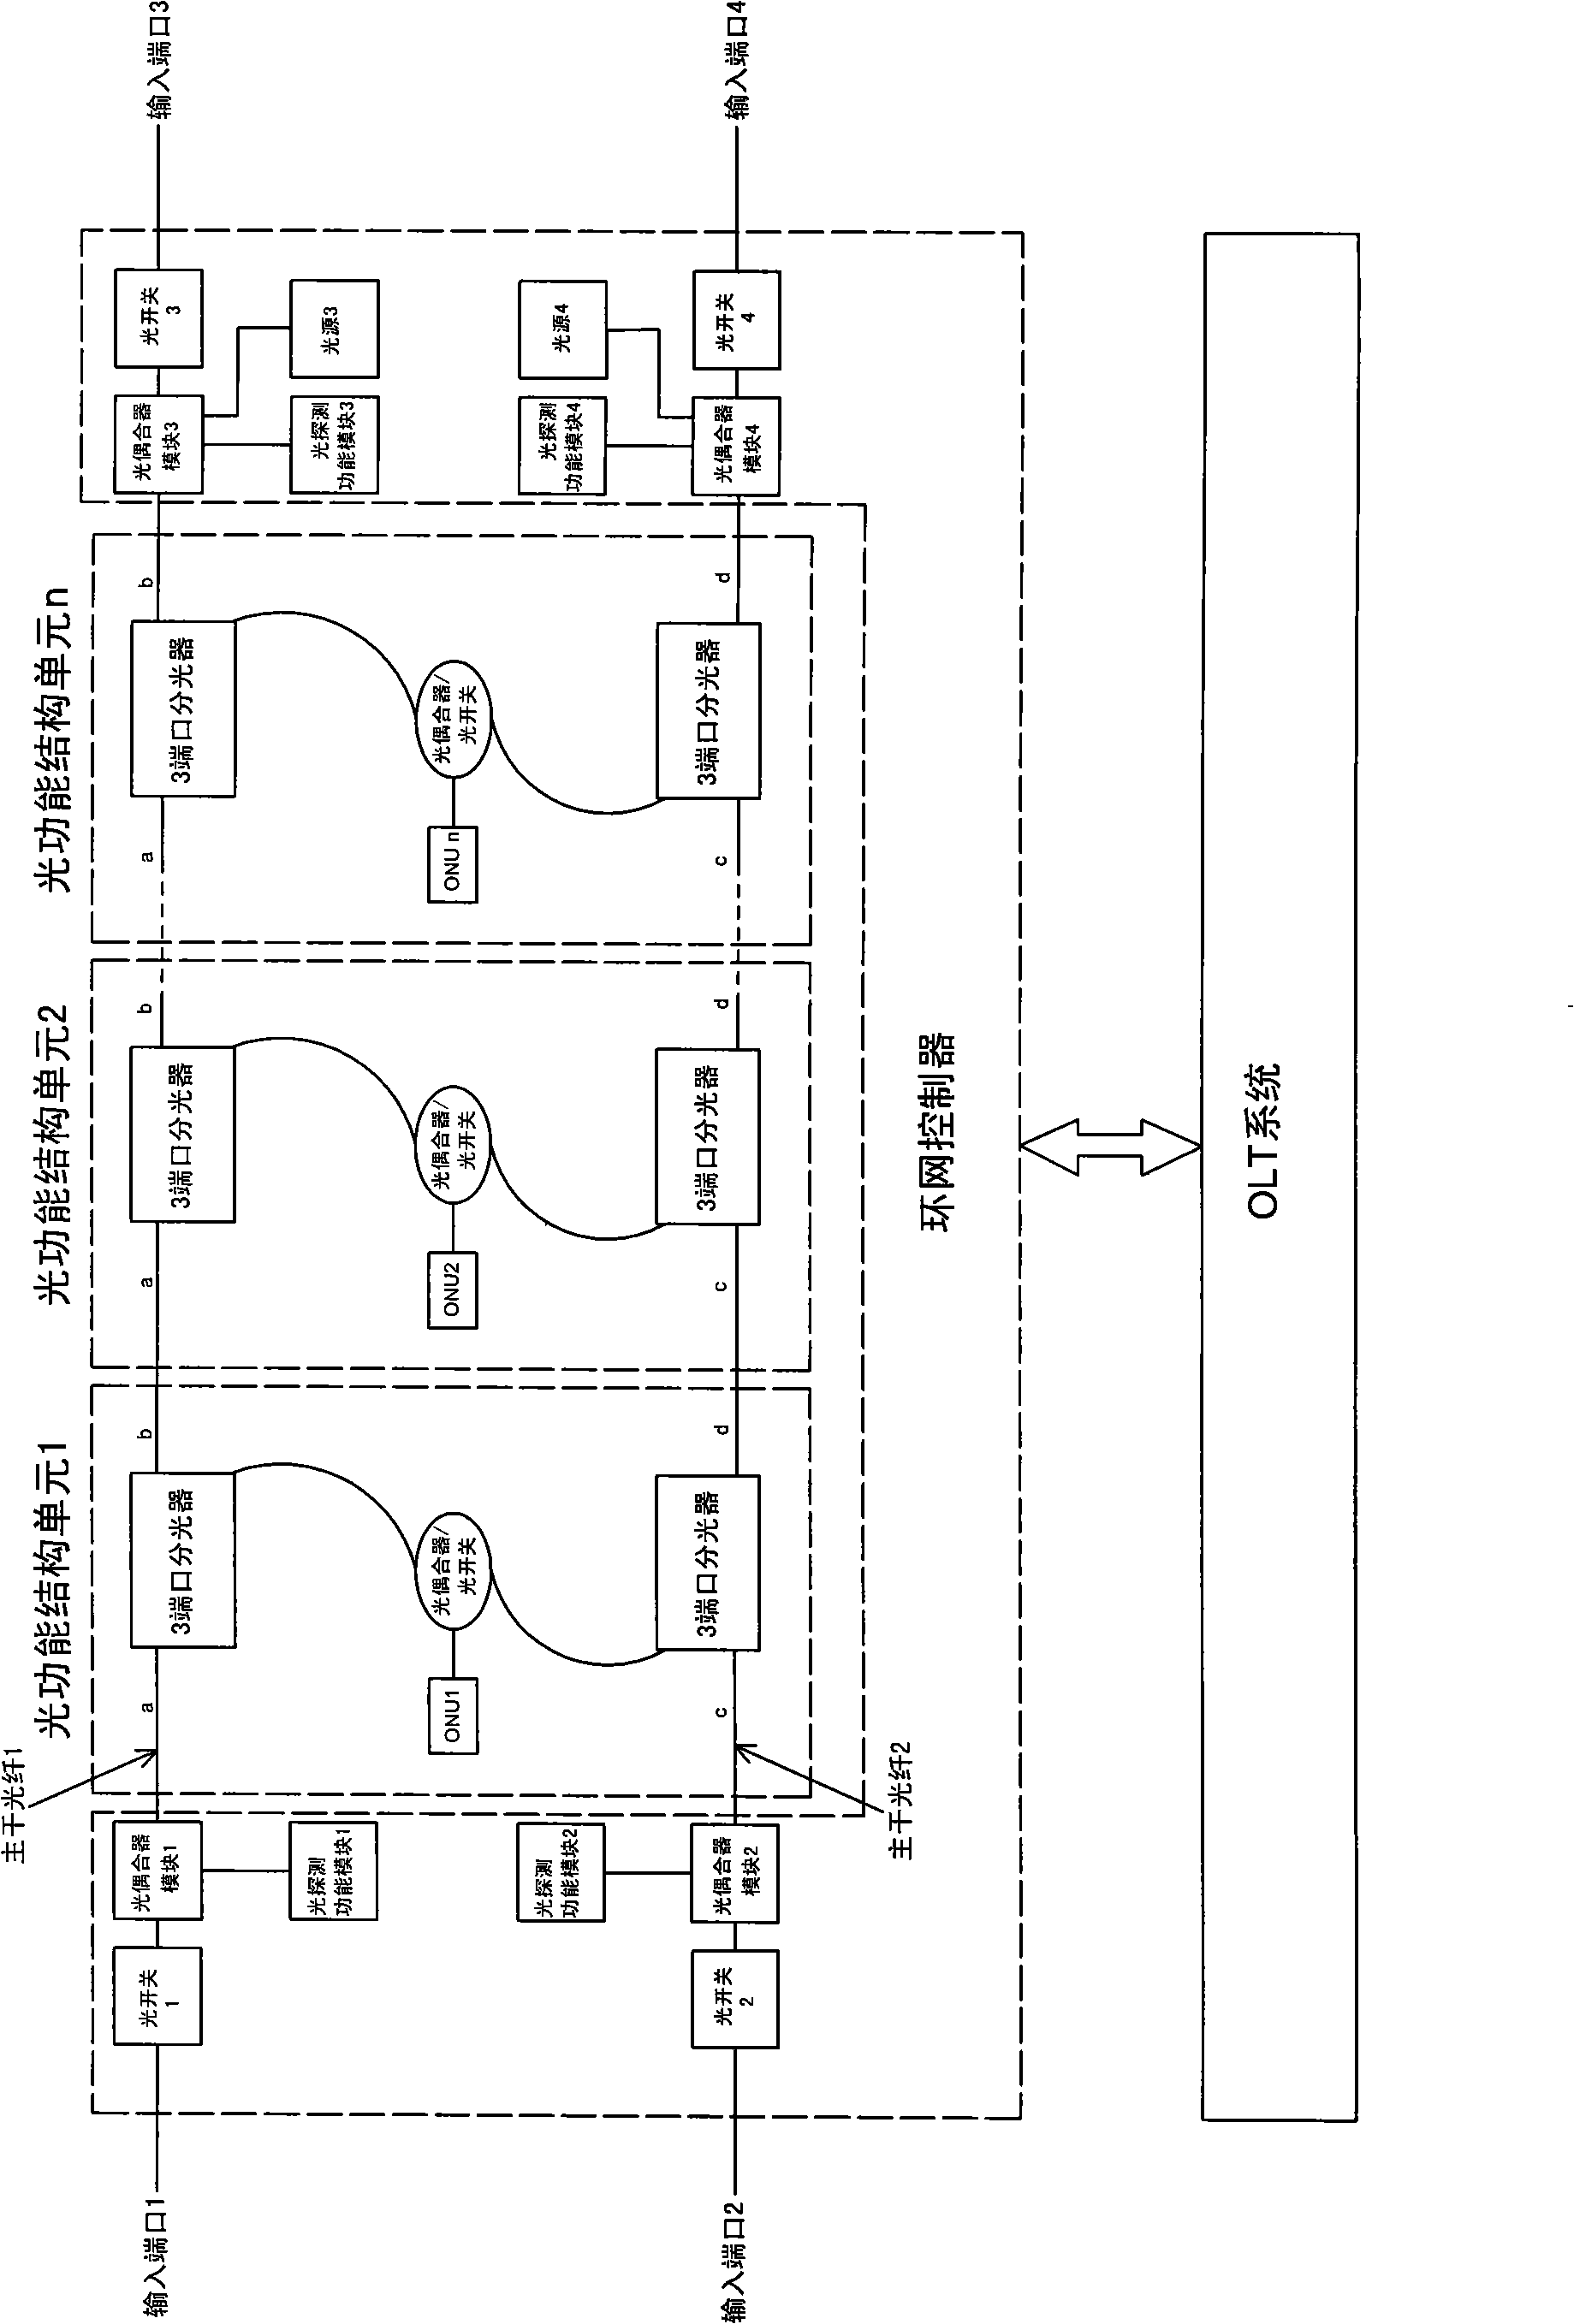 Annular double-bus redundancy protection architecture of passive optical network